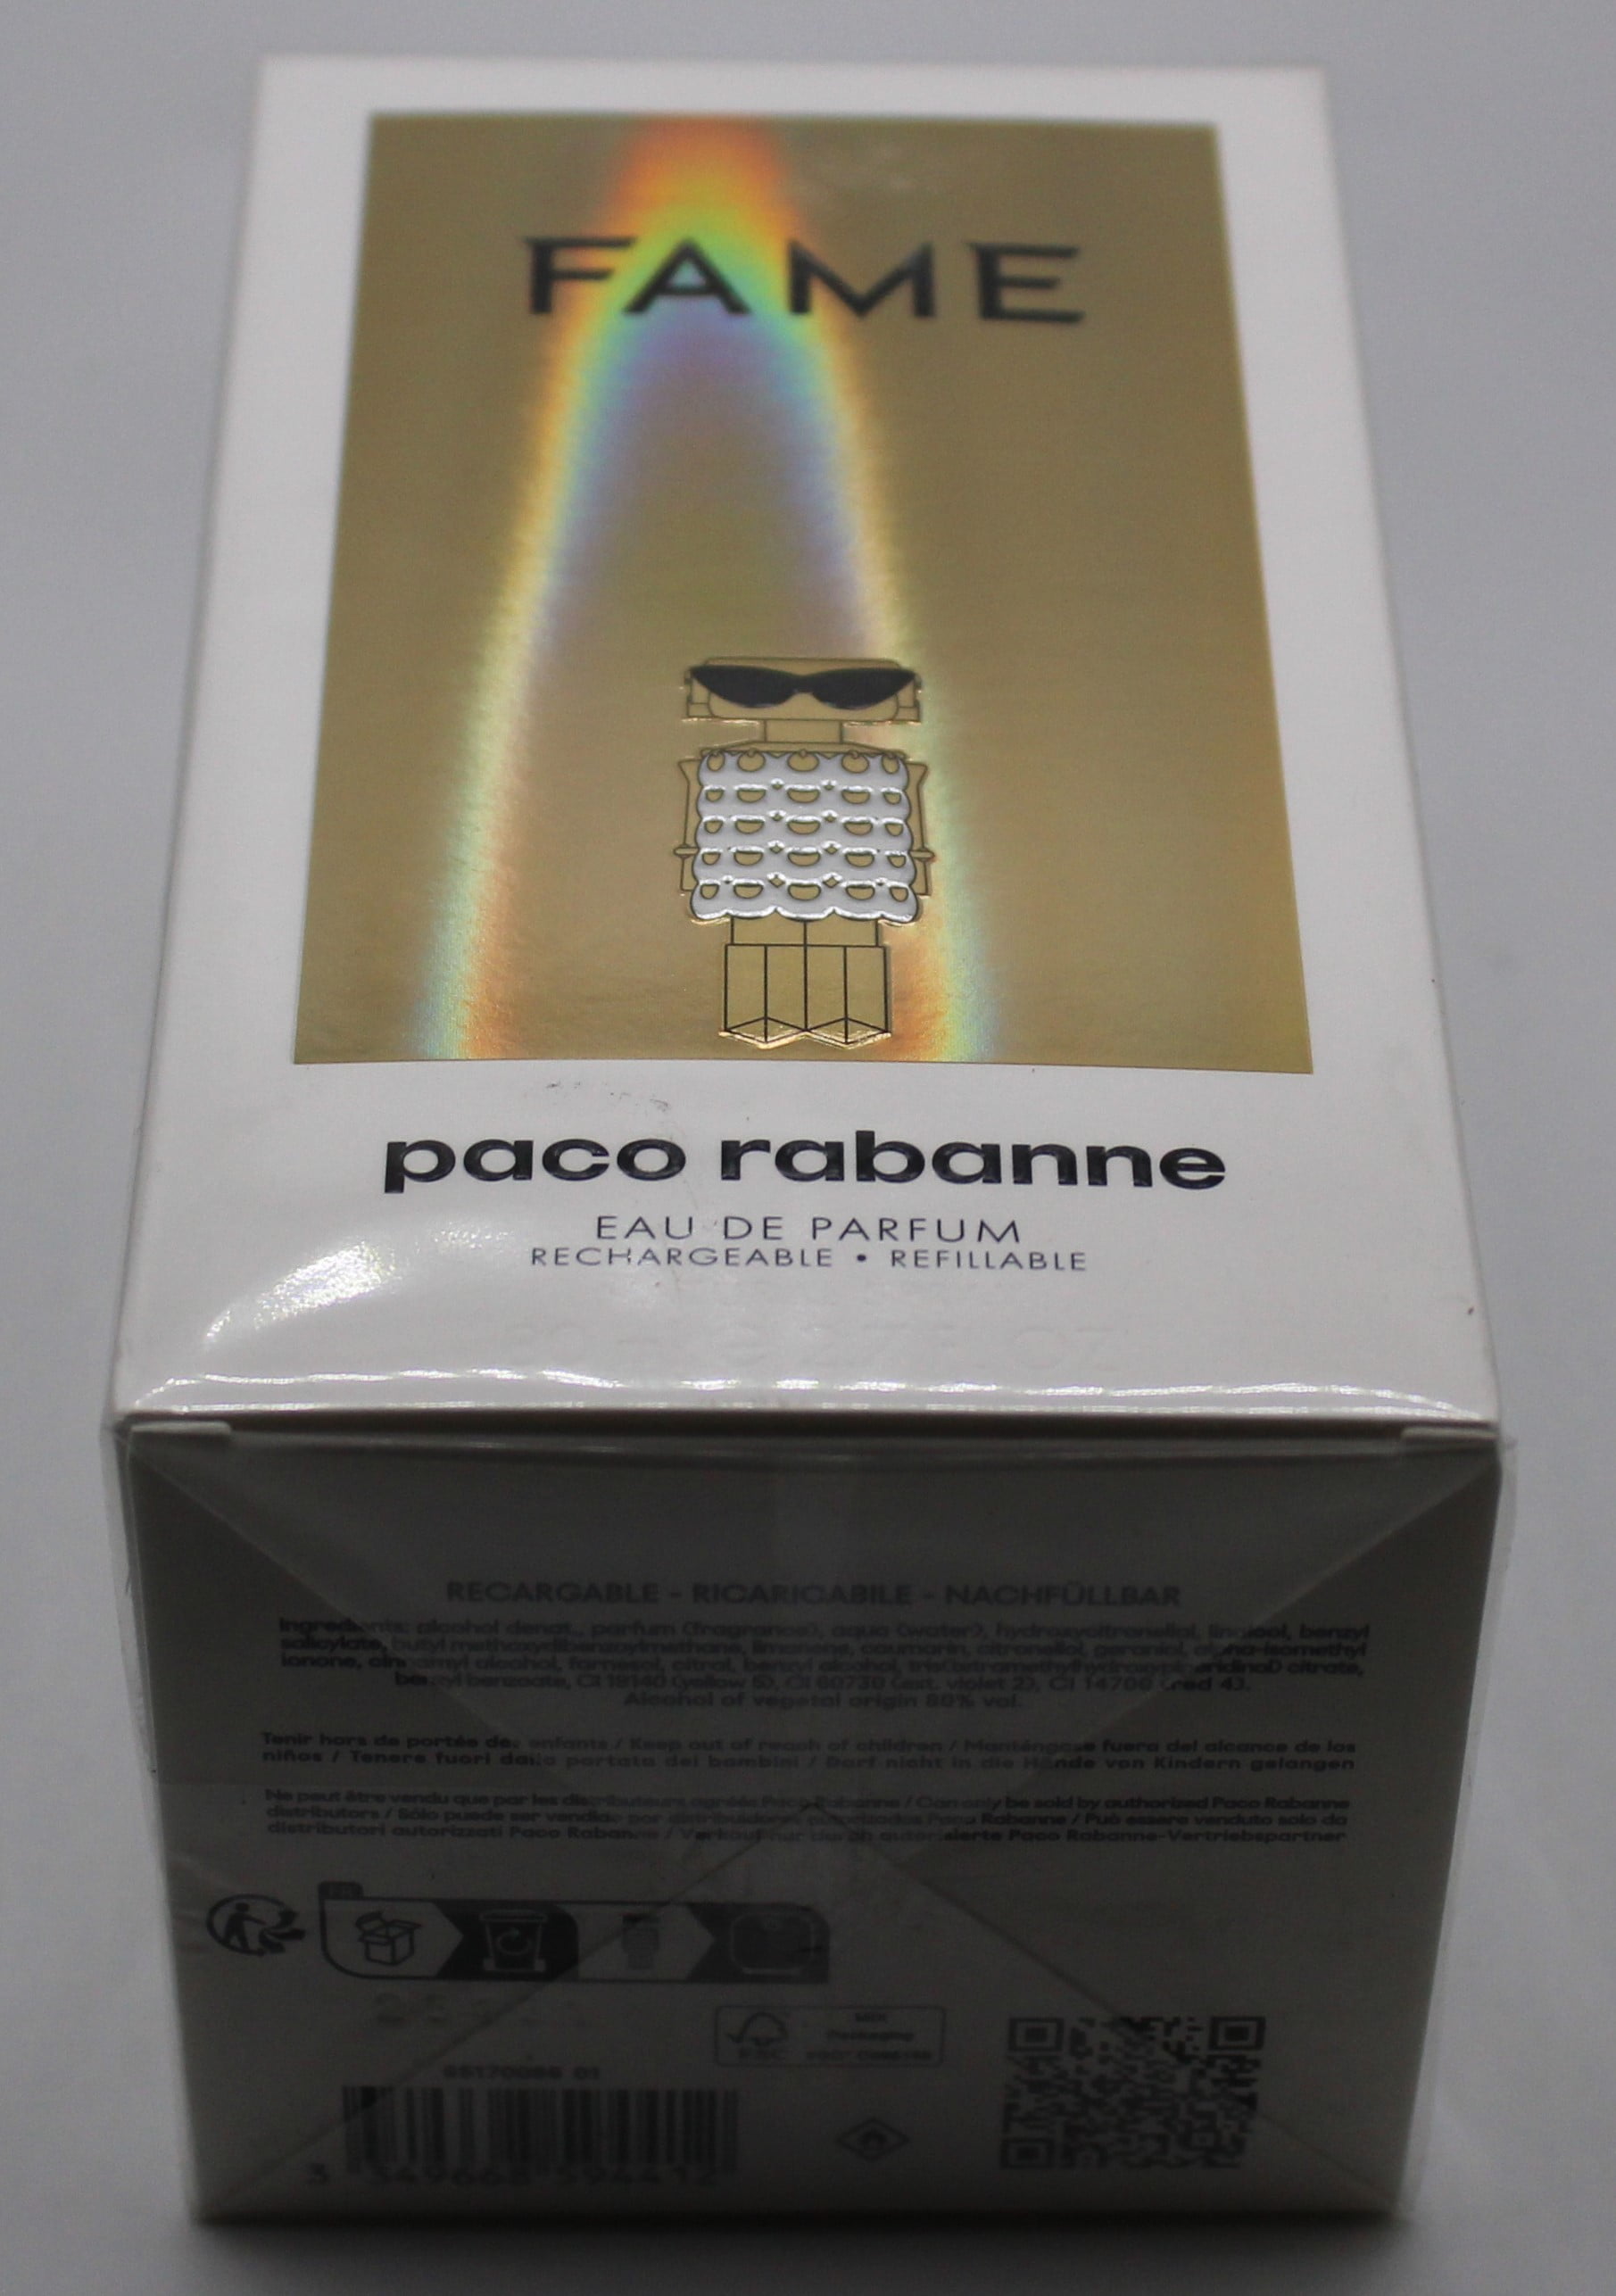 Fame by Paco Rabanne for Women - 2.7 oz EDP Spray (Refillable)